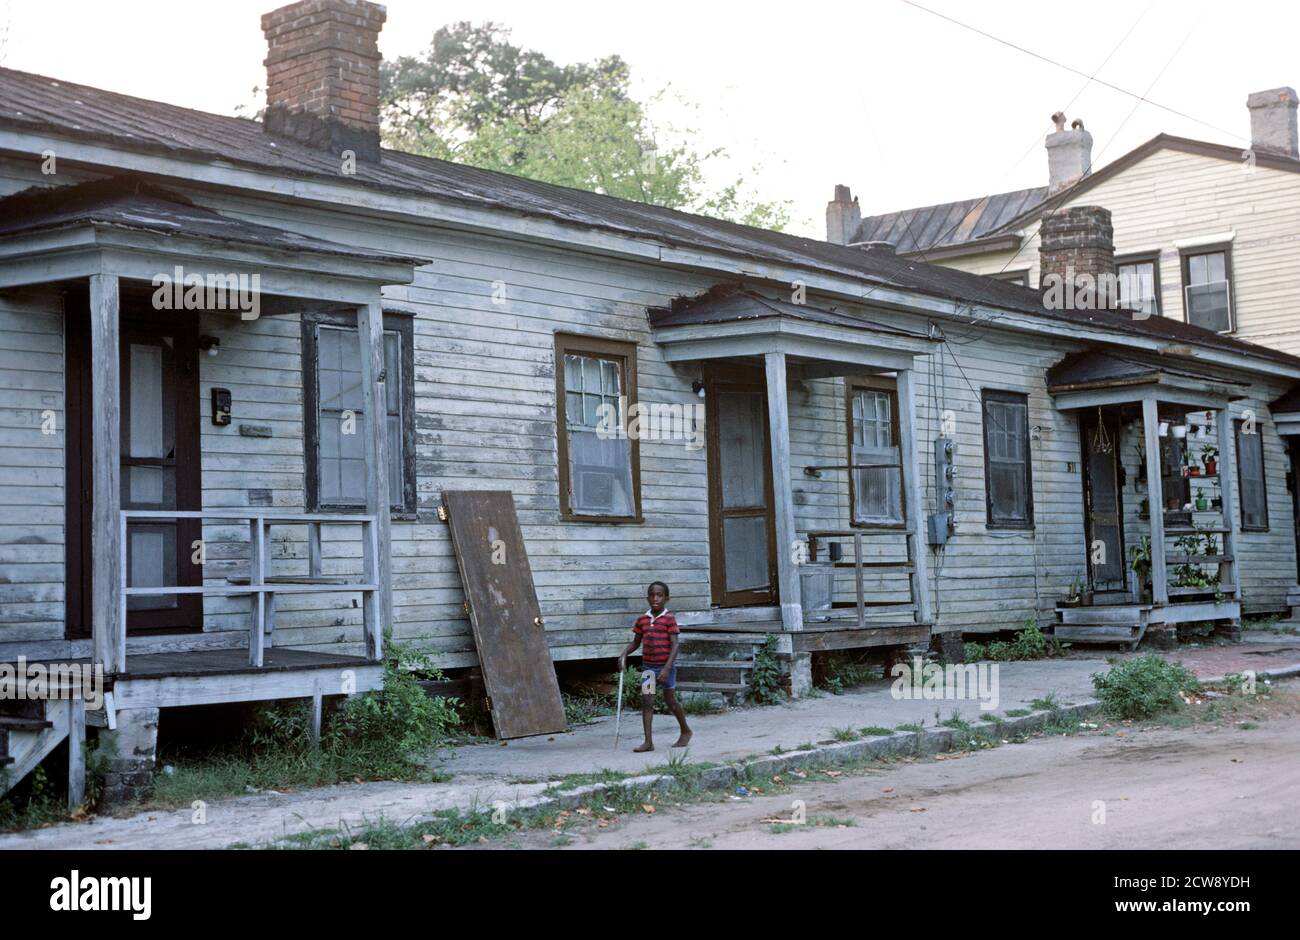 AFRICAN AMERICAN CHILD IN FRONT OF WOODEN CLAPBOARD HOUSES IN DOWNTOWN SAVANNAH, GEORGIA, USA, 1980s Stock Photo